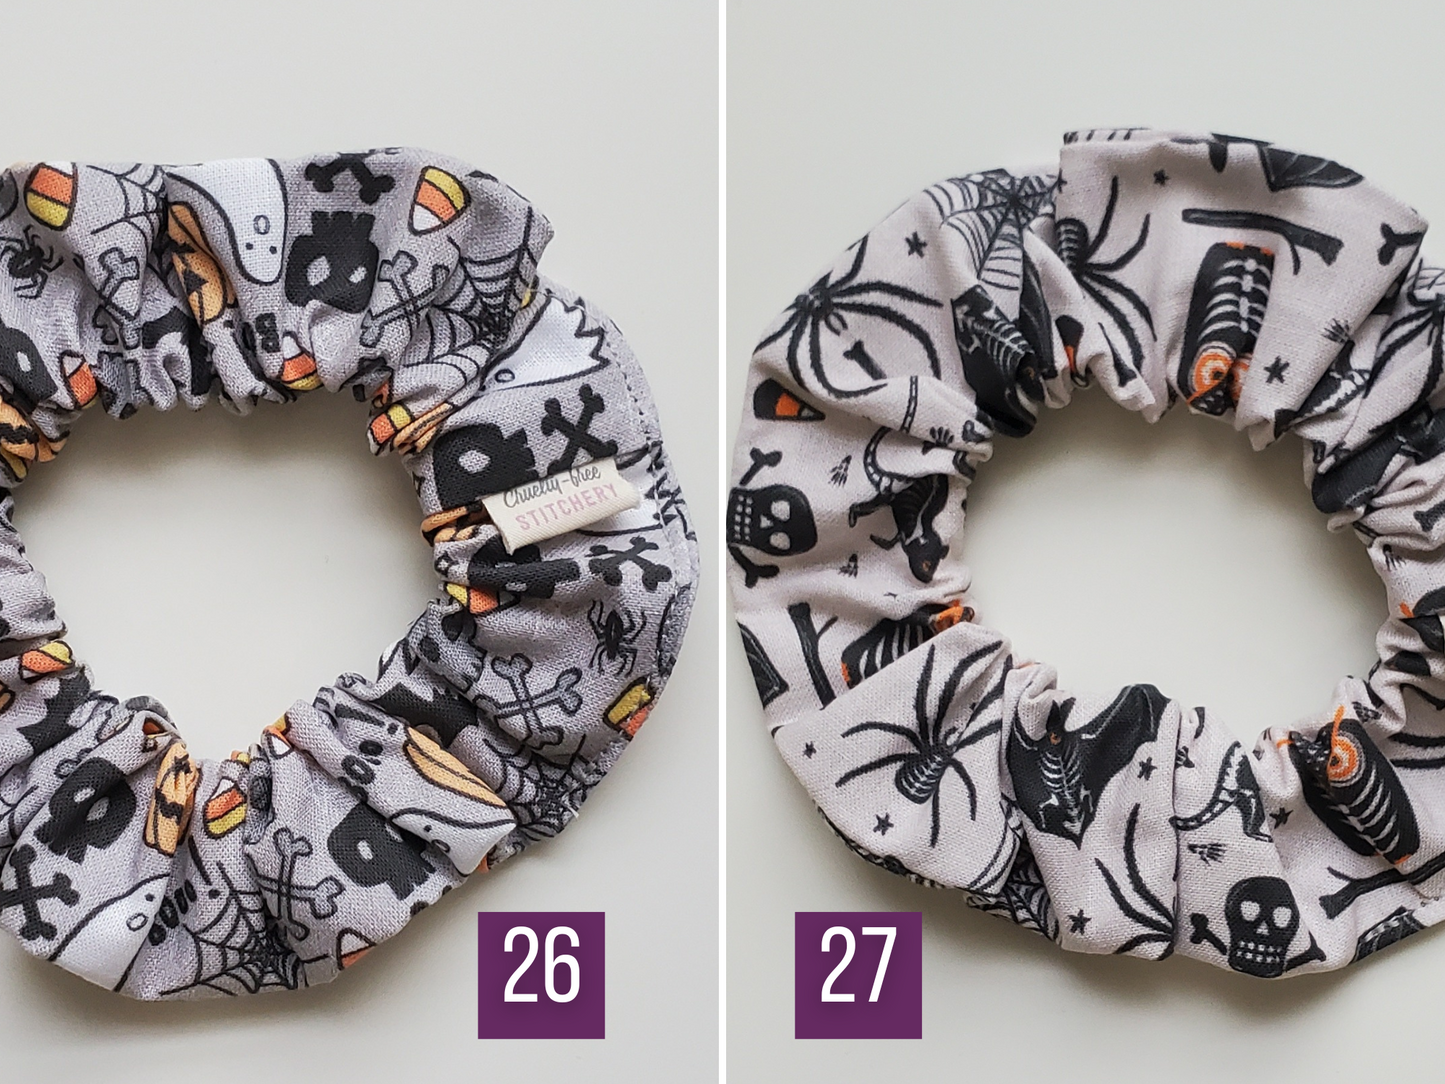 Comparison of prints 26 and 27. Both have a grey background with Halloween motifs. 26 is a more light true grey with cartoonish design. 27 is a lighter brownish grey with spooky design.